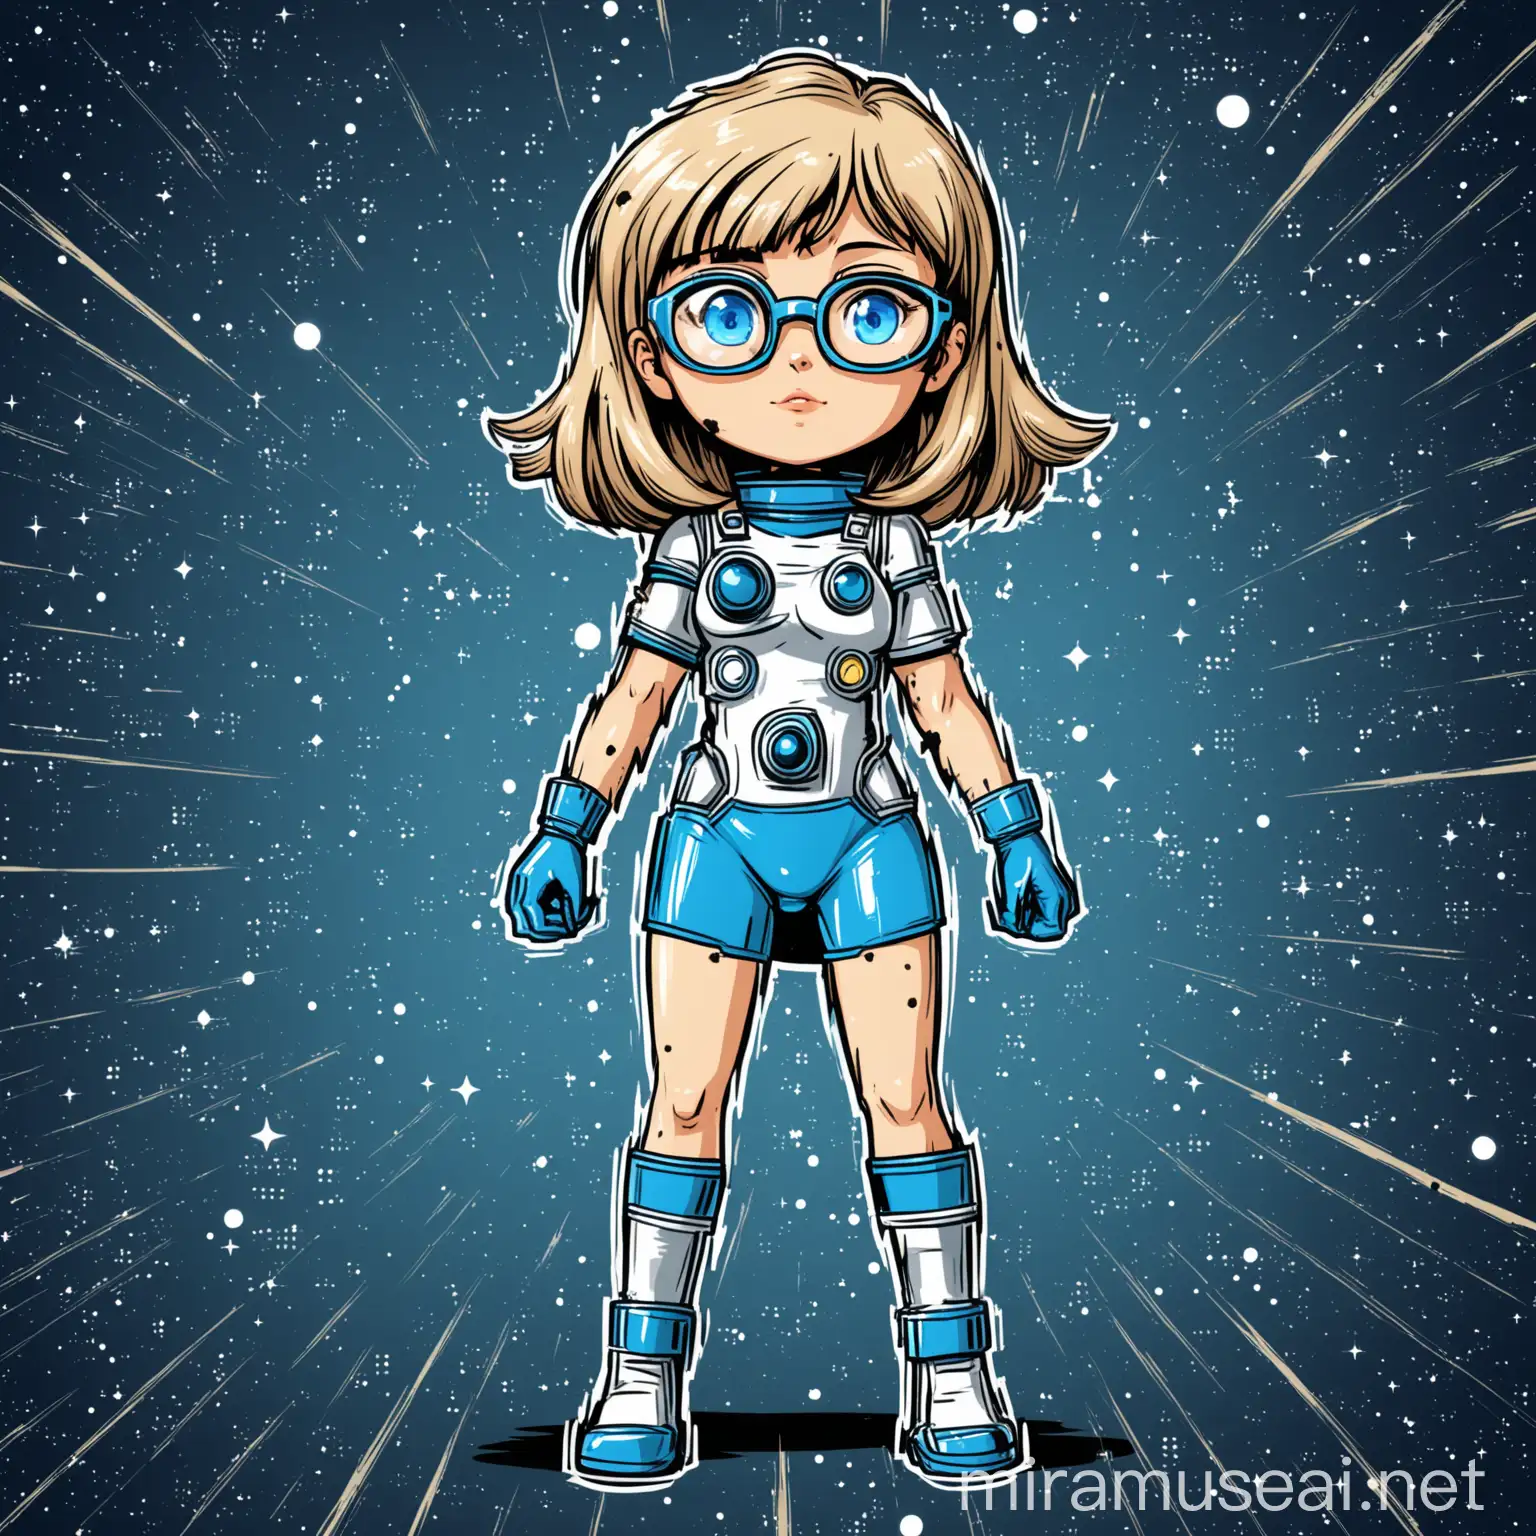 Comic Style Caucasian Girl with Bangs and Glasses in AstroThemed Attire